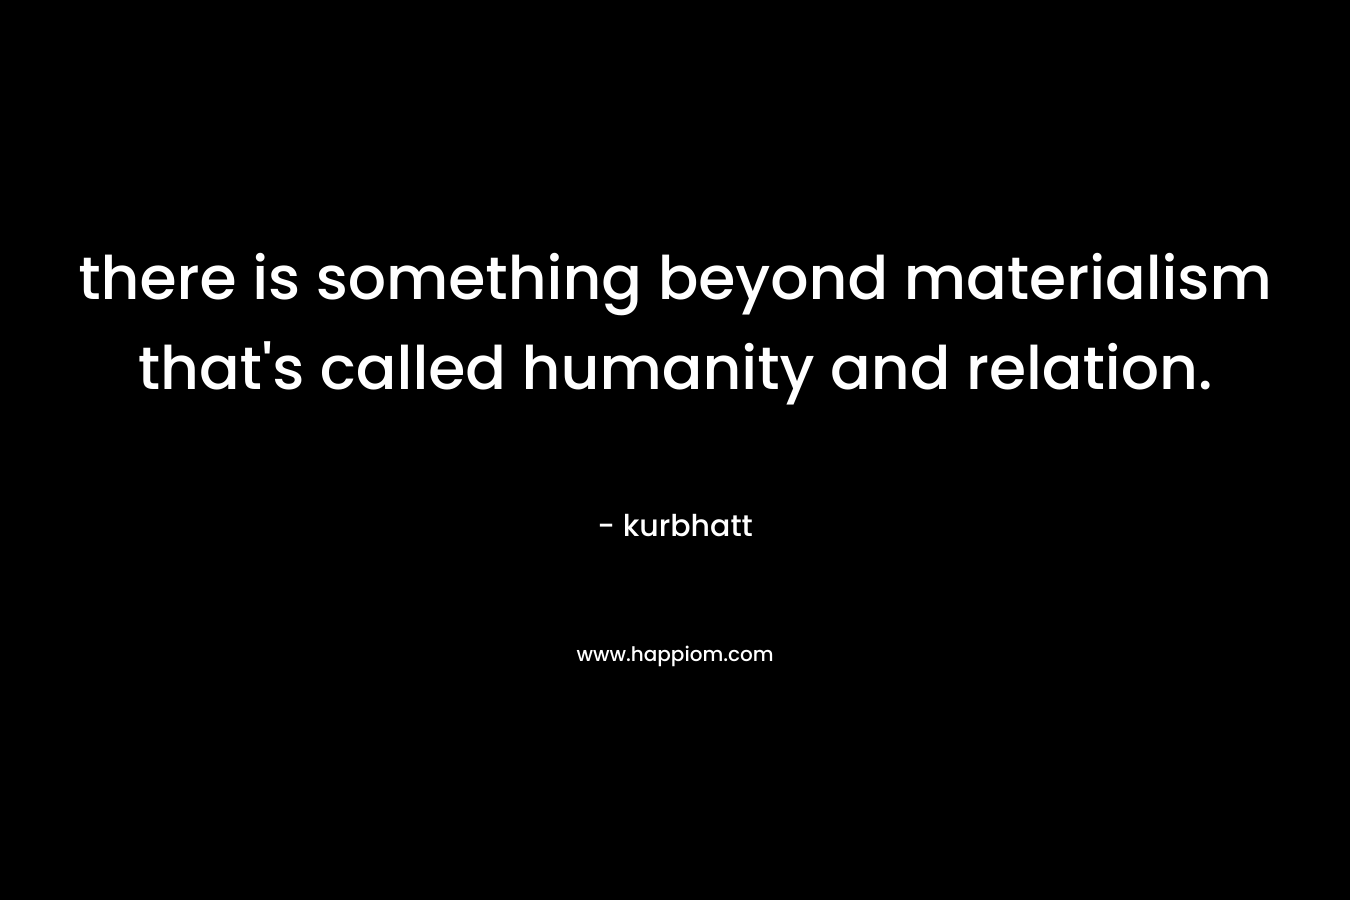 there is something beyond materialism that's called humanity and relation.